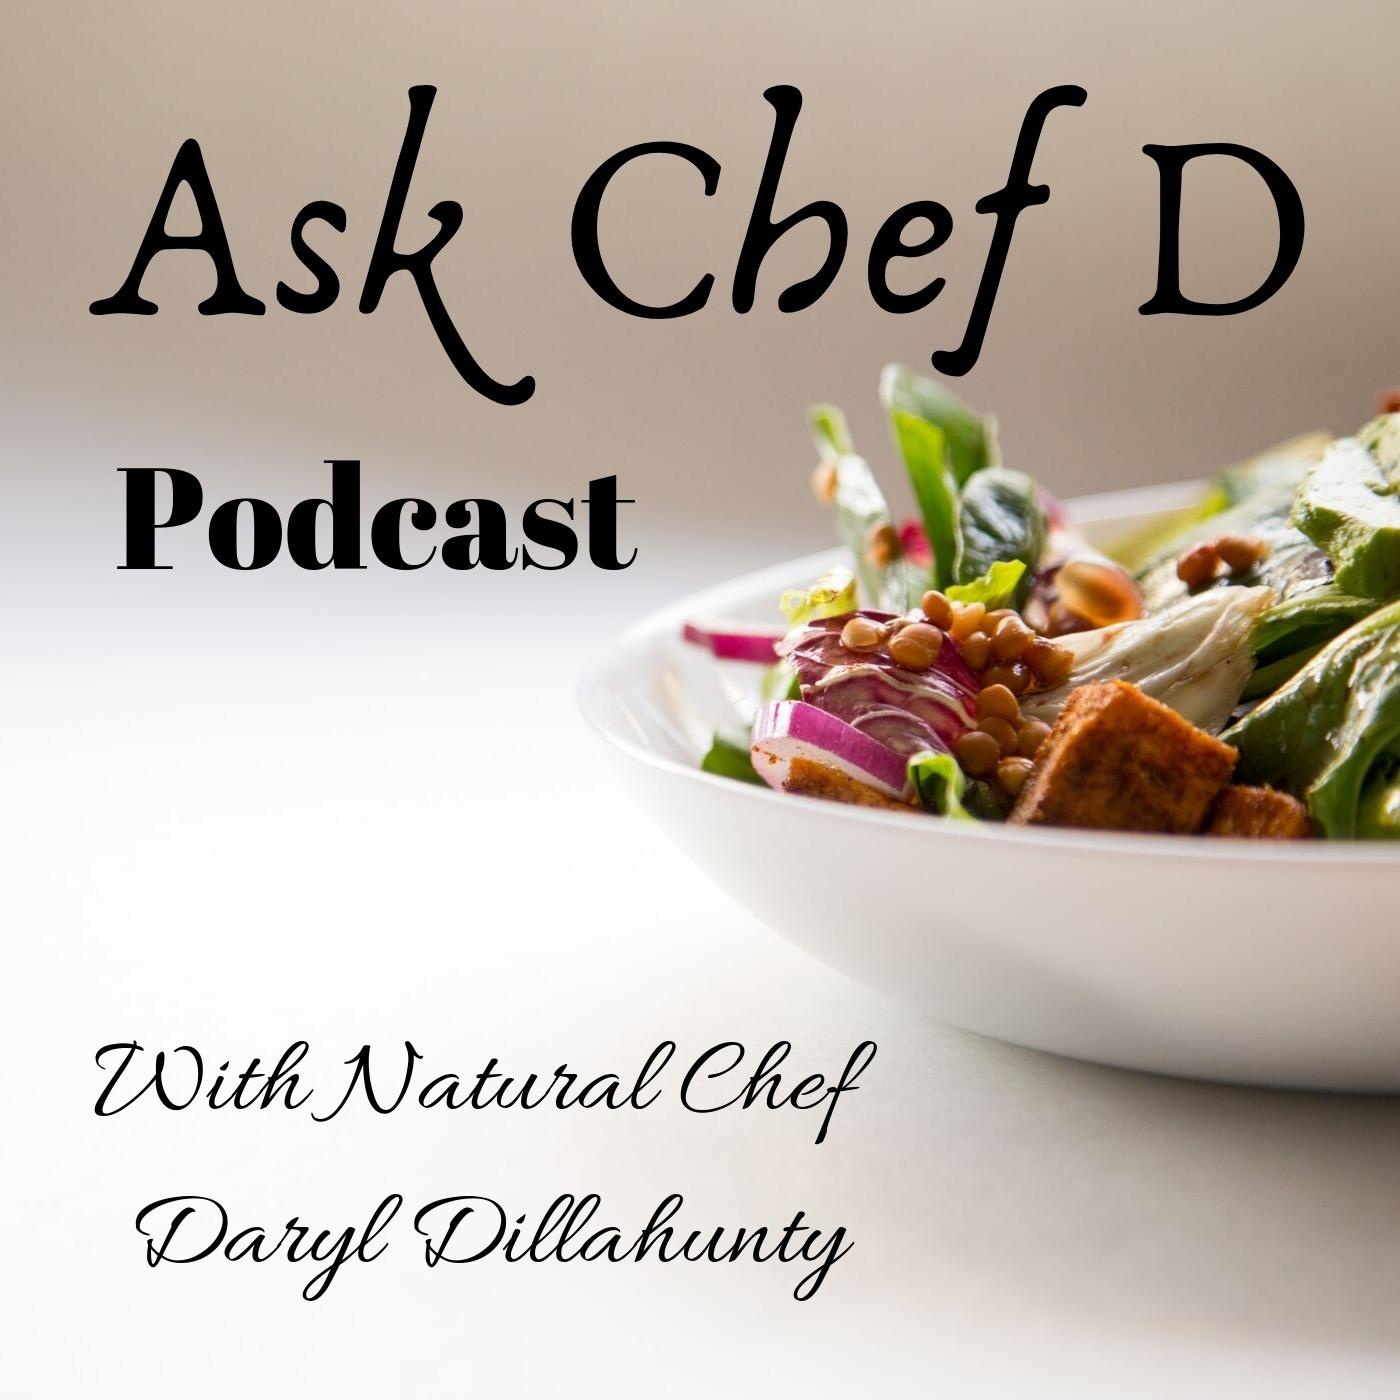 Ask Chef D Podcast with Daryl Dillahunty